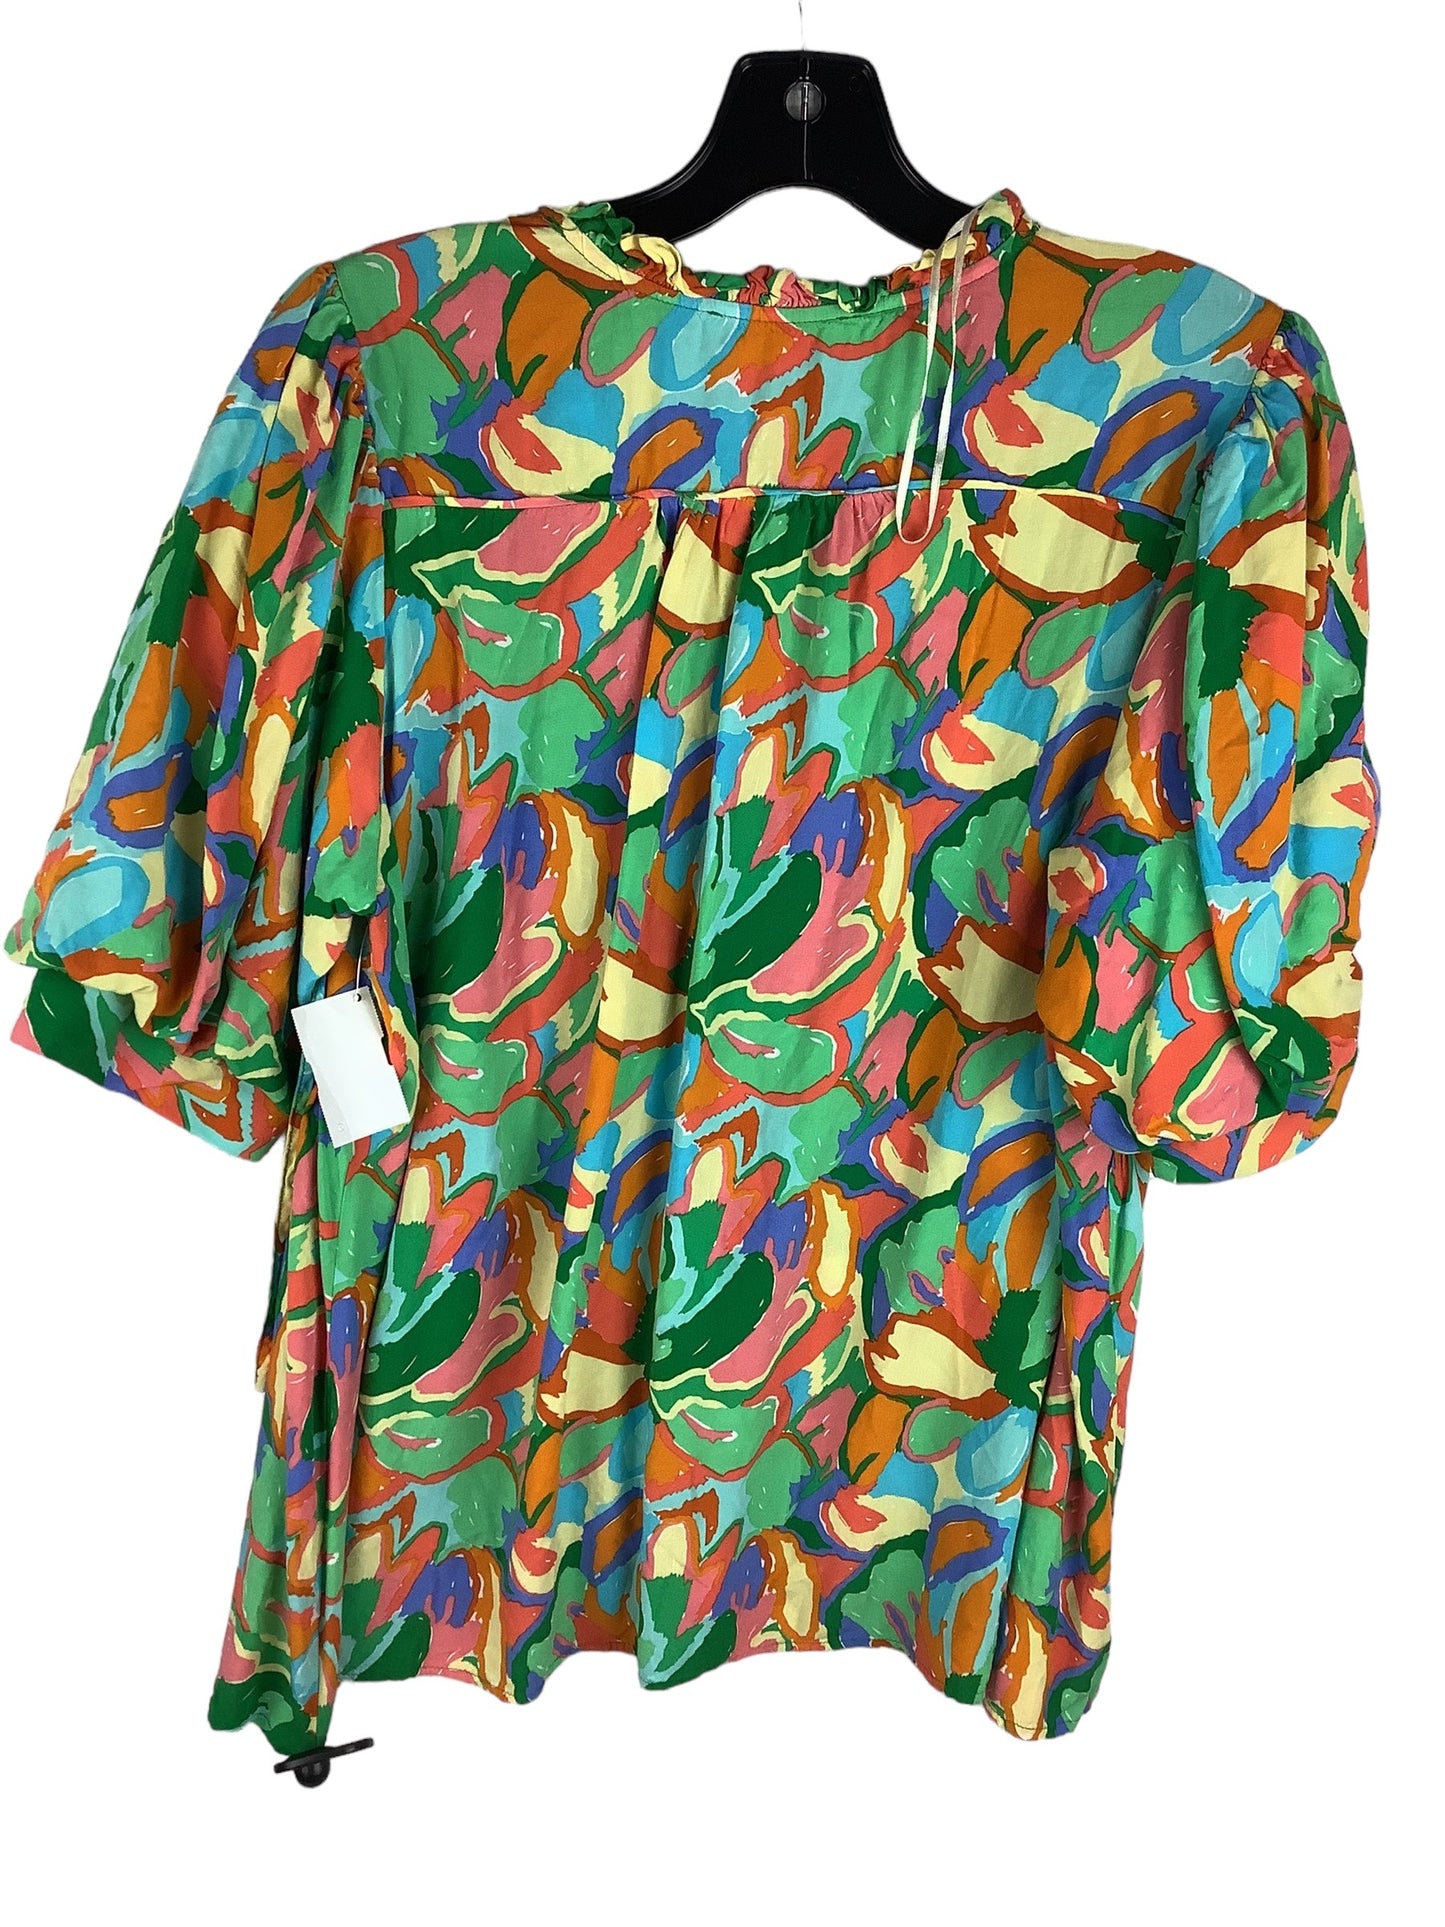 Multi-colored Top Short Sleeve Umgee, Size Xl